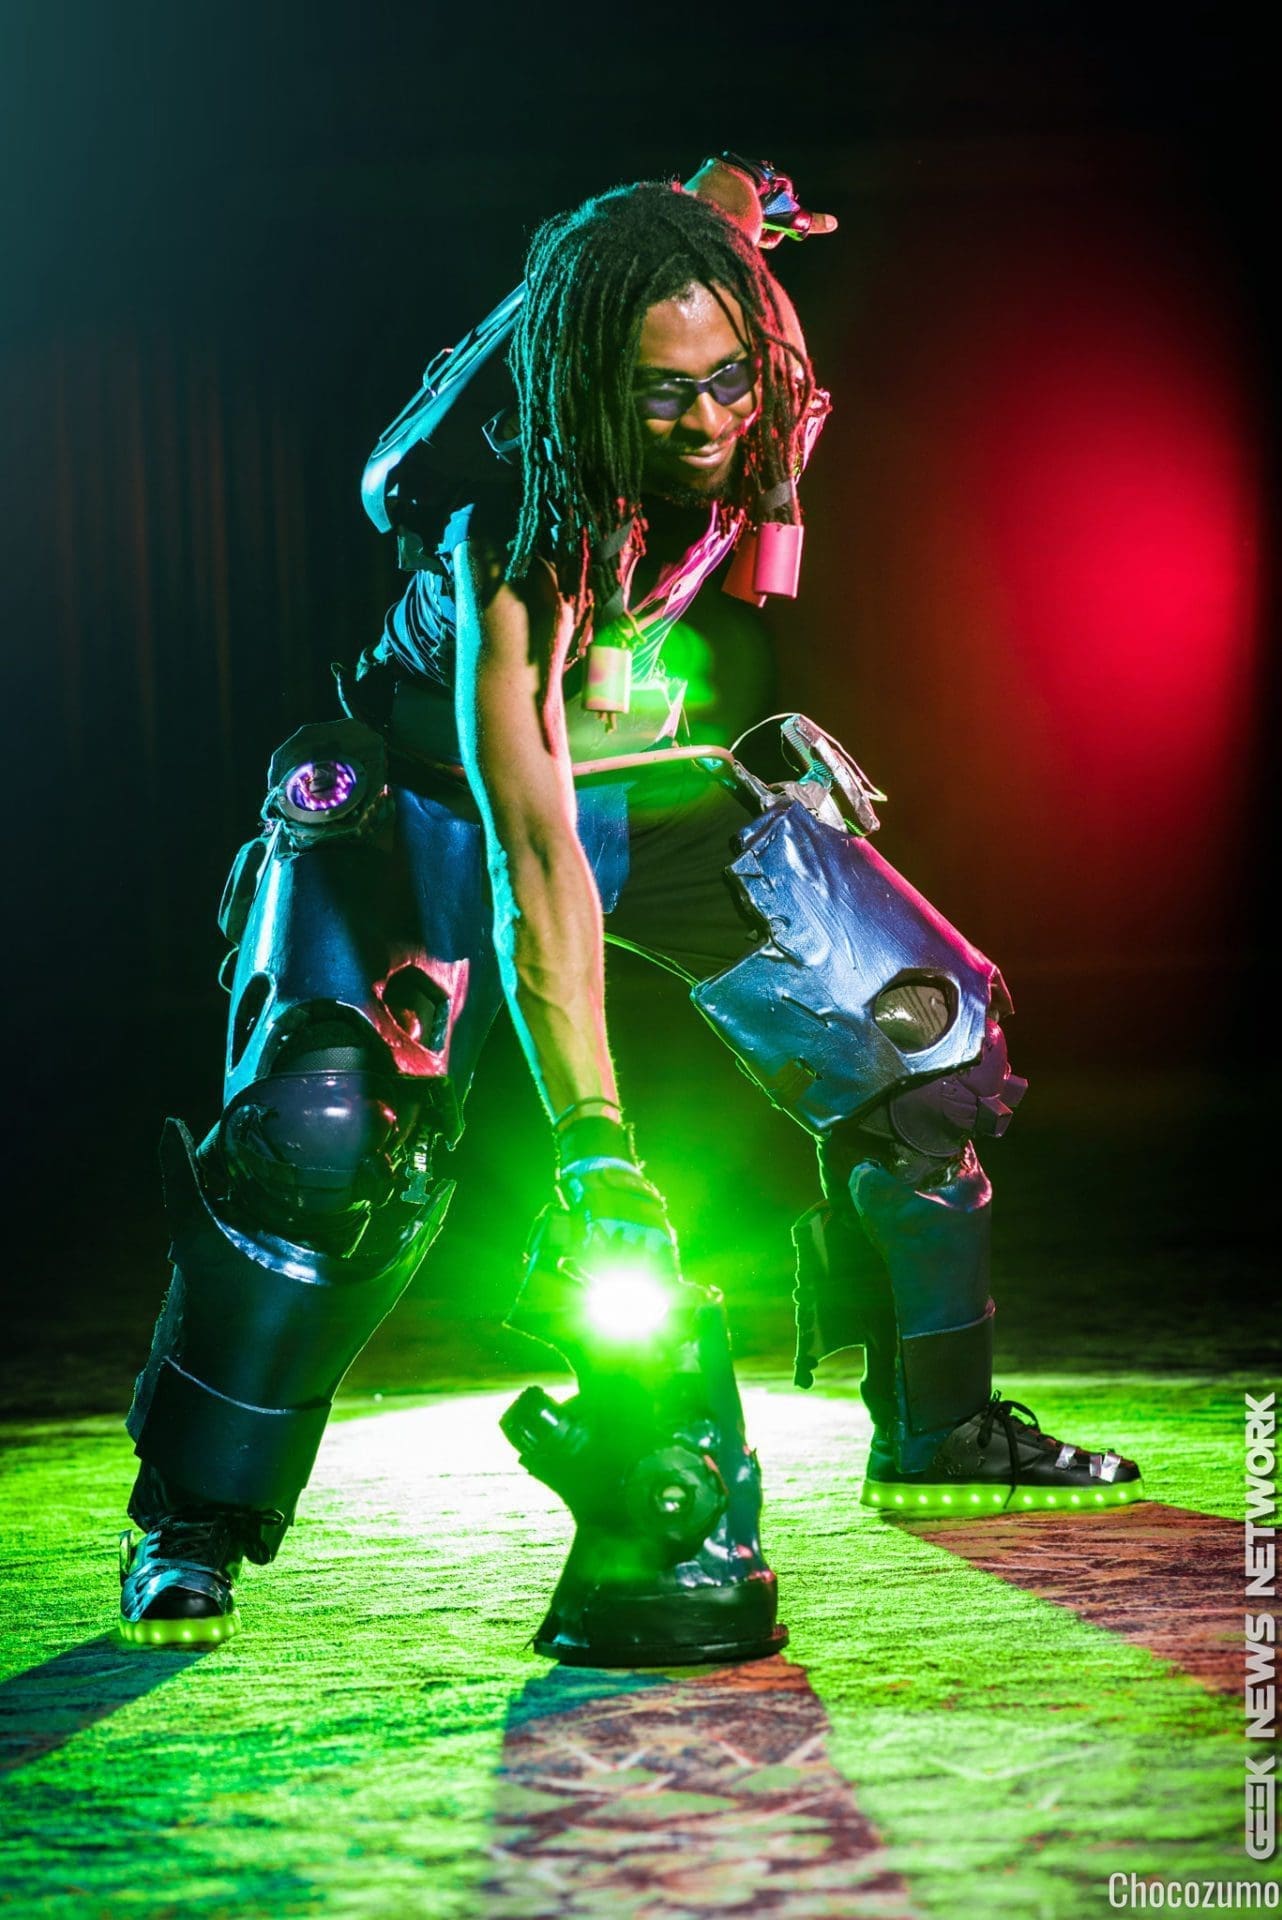 convention, cosplay, cosplay photography, event review, Game On Expo, gaming, photo gallery